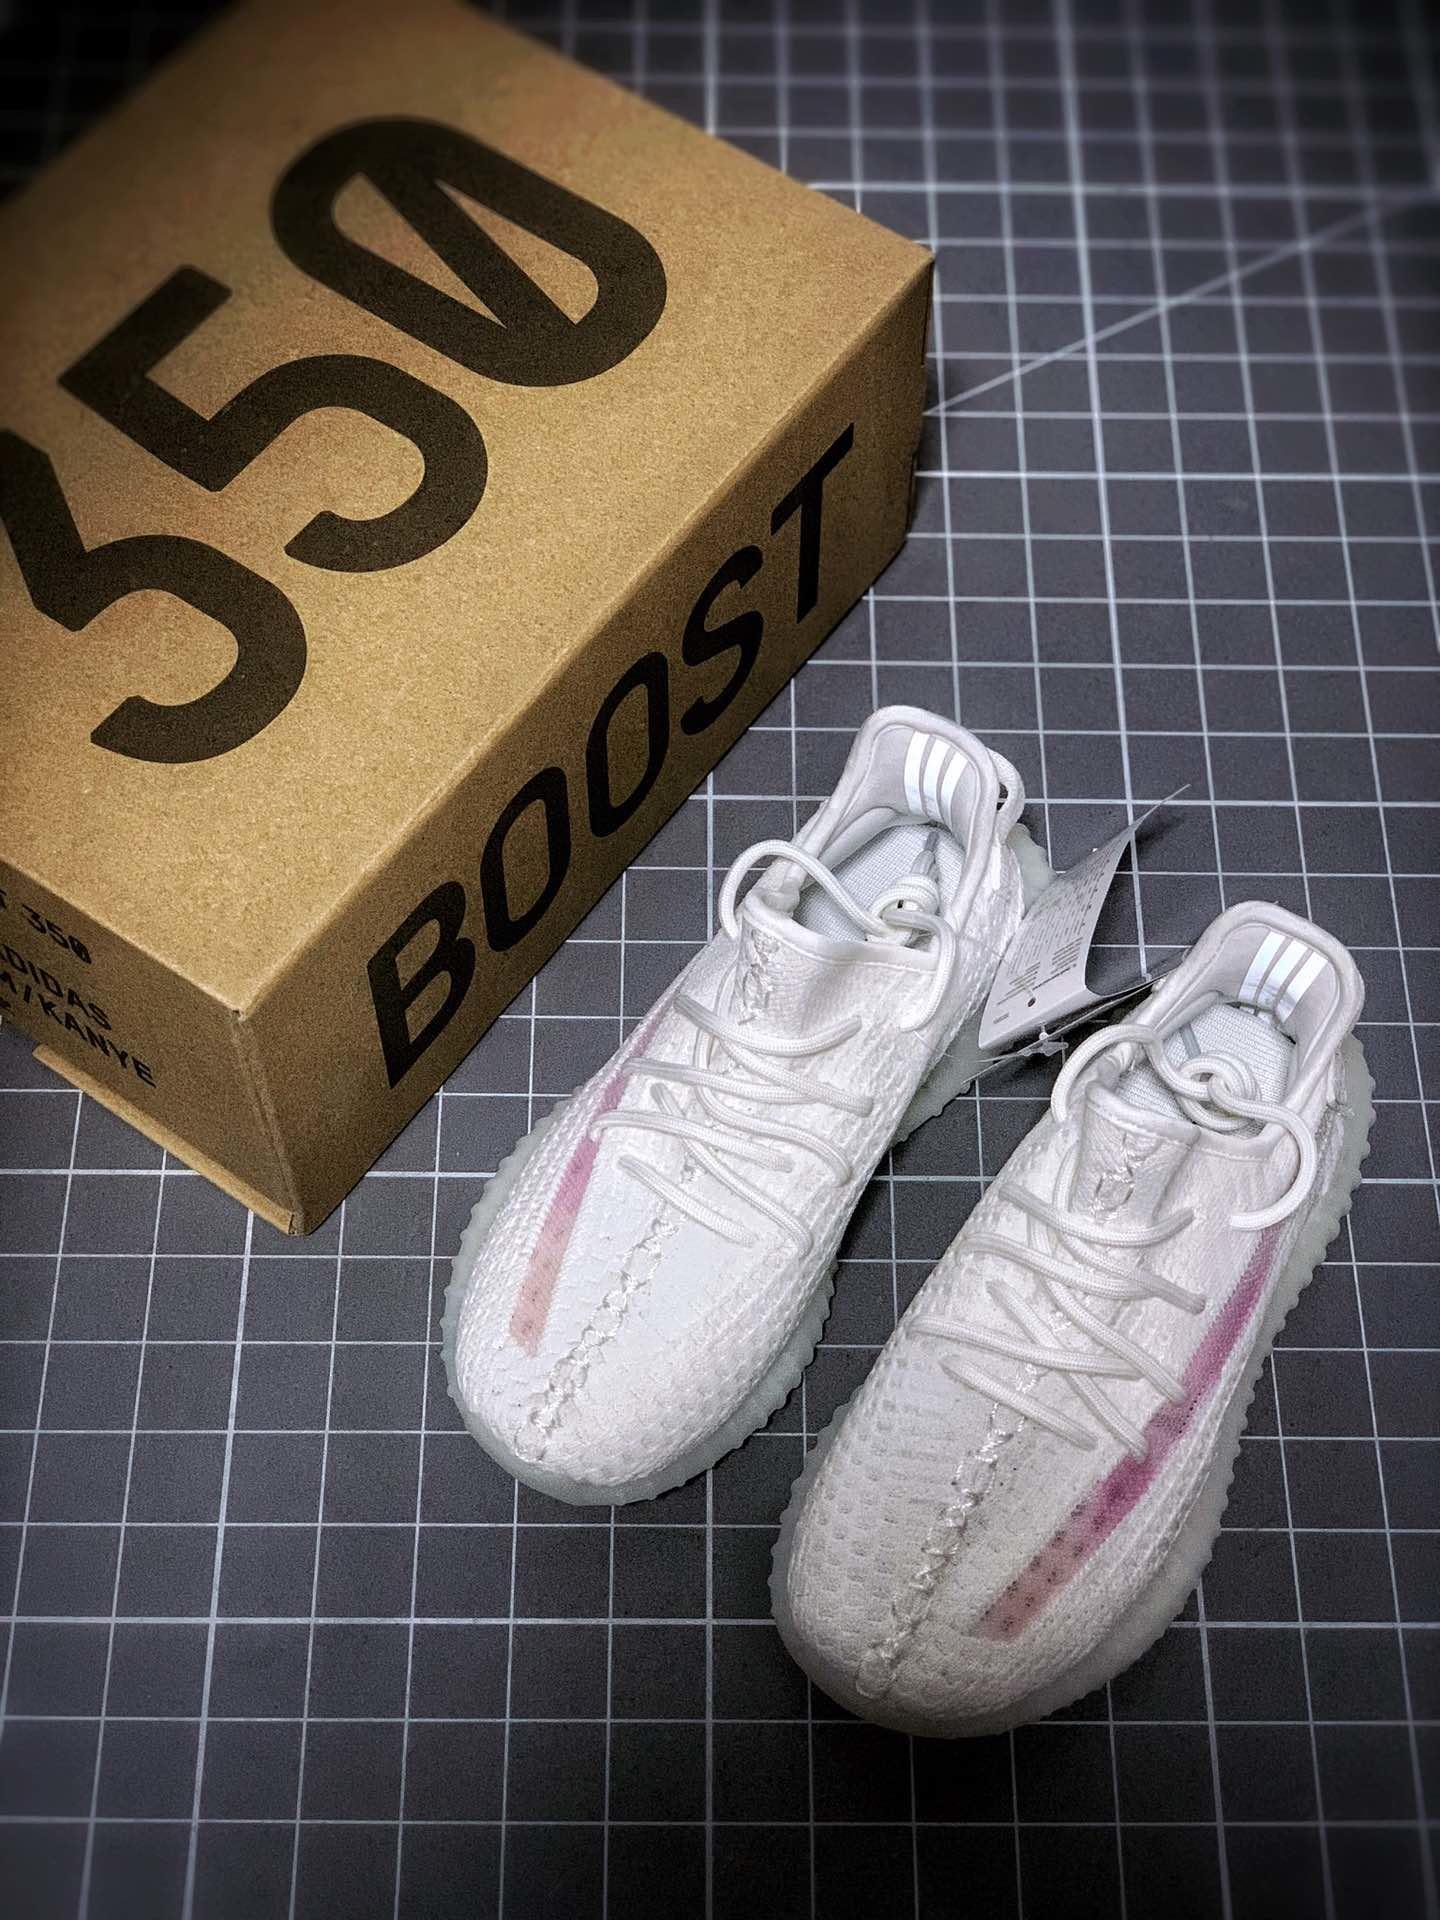 ADIDAS YEEZY BOOST 350 V2 DISCOLORATION 